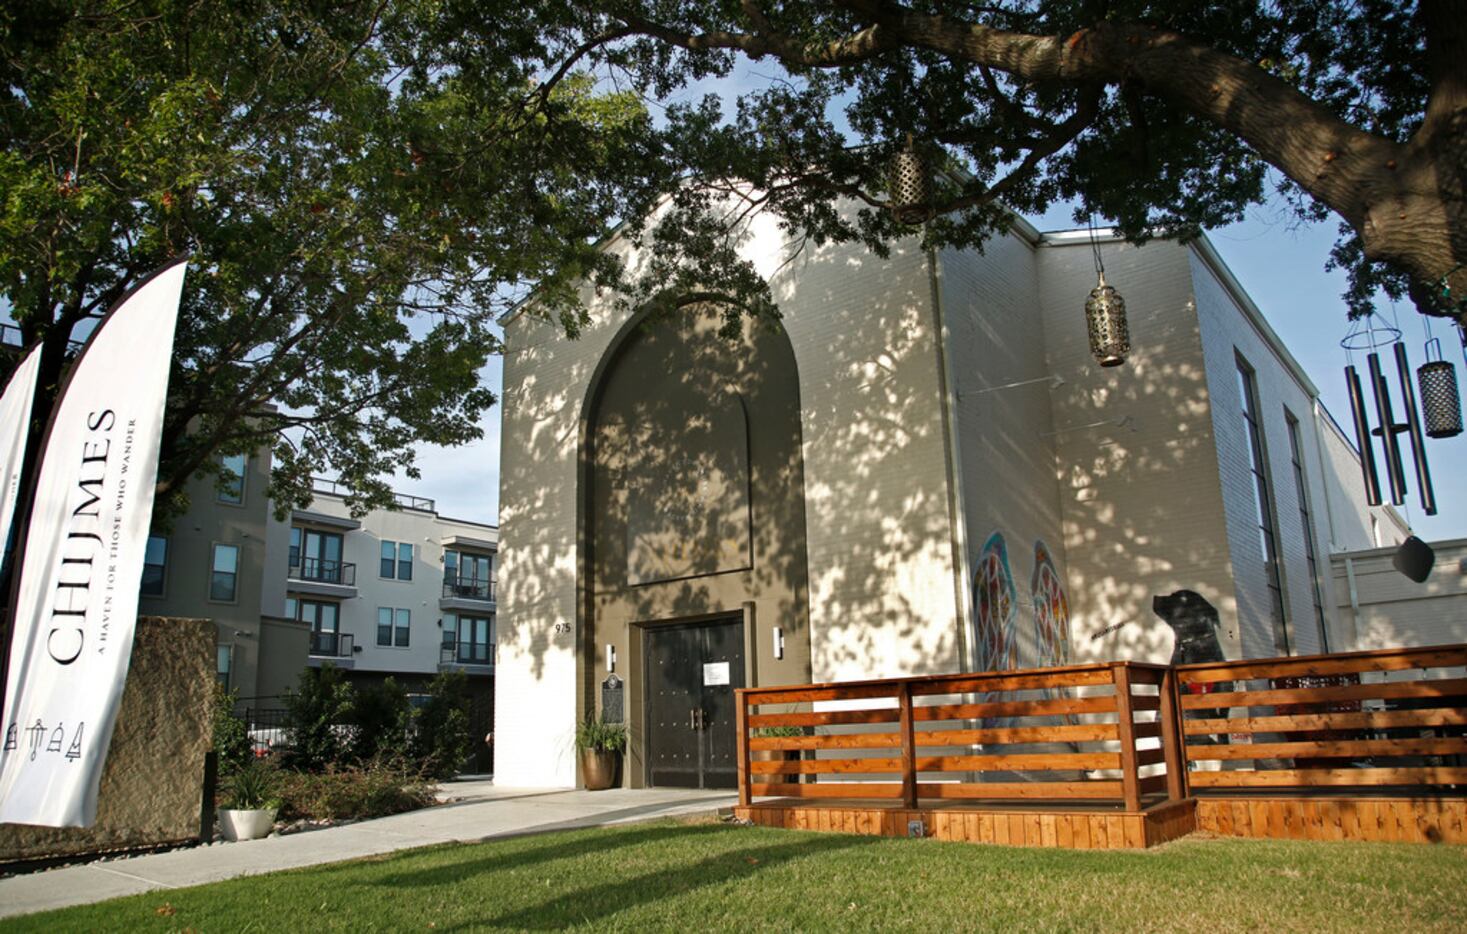 CHIJMES, a boutique hotel and event venue on Zang Blvd built in the historic Trinity...